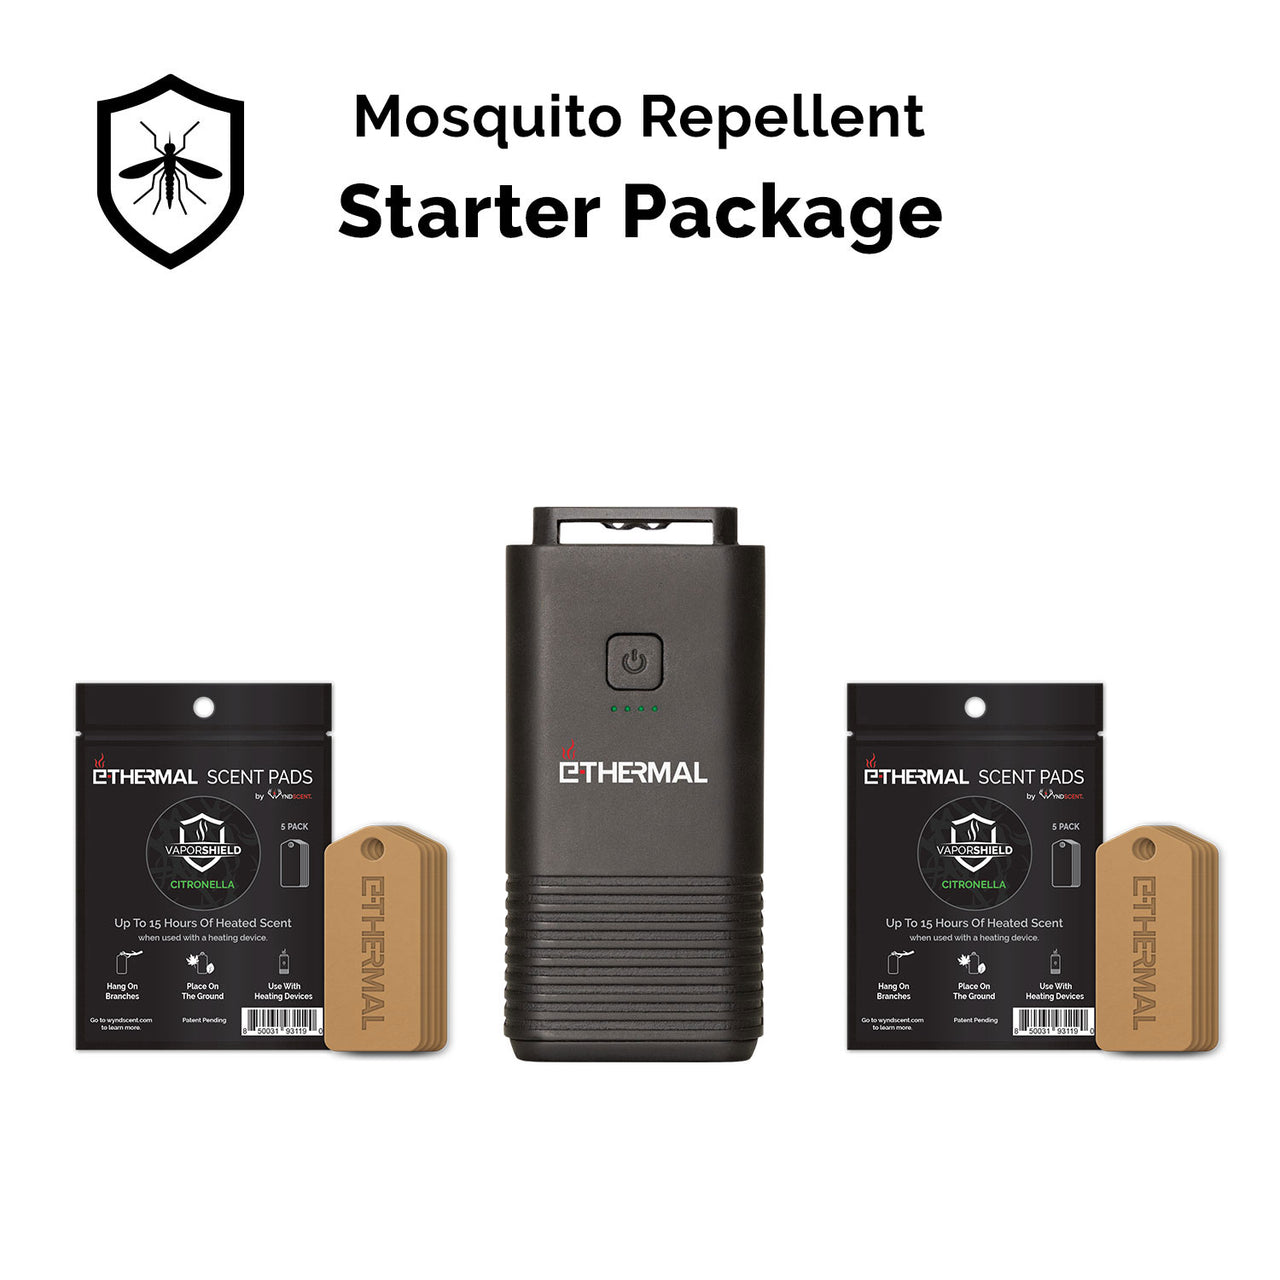 E-Thermal Mosquito Repellent Starter Kit